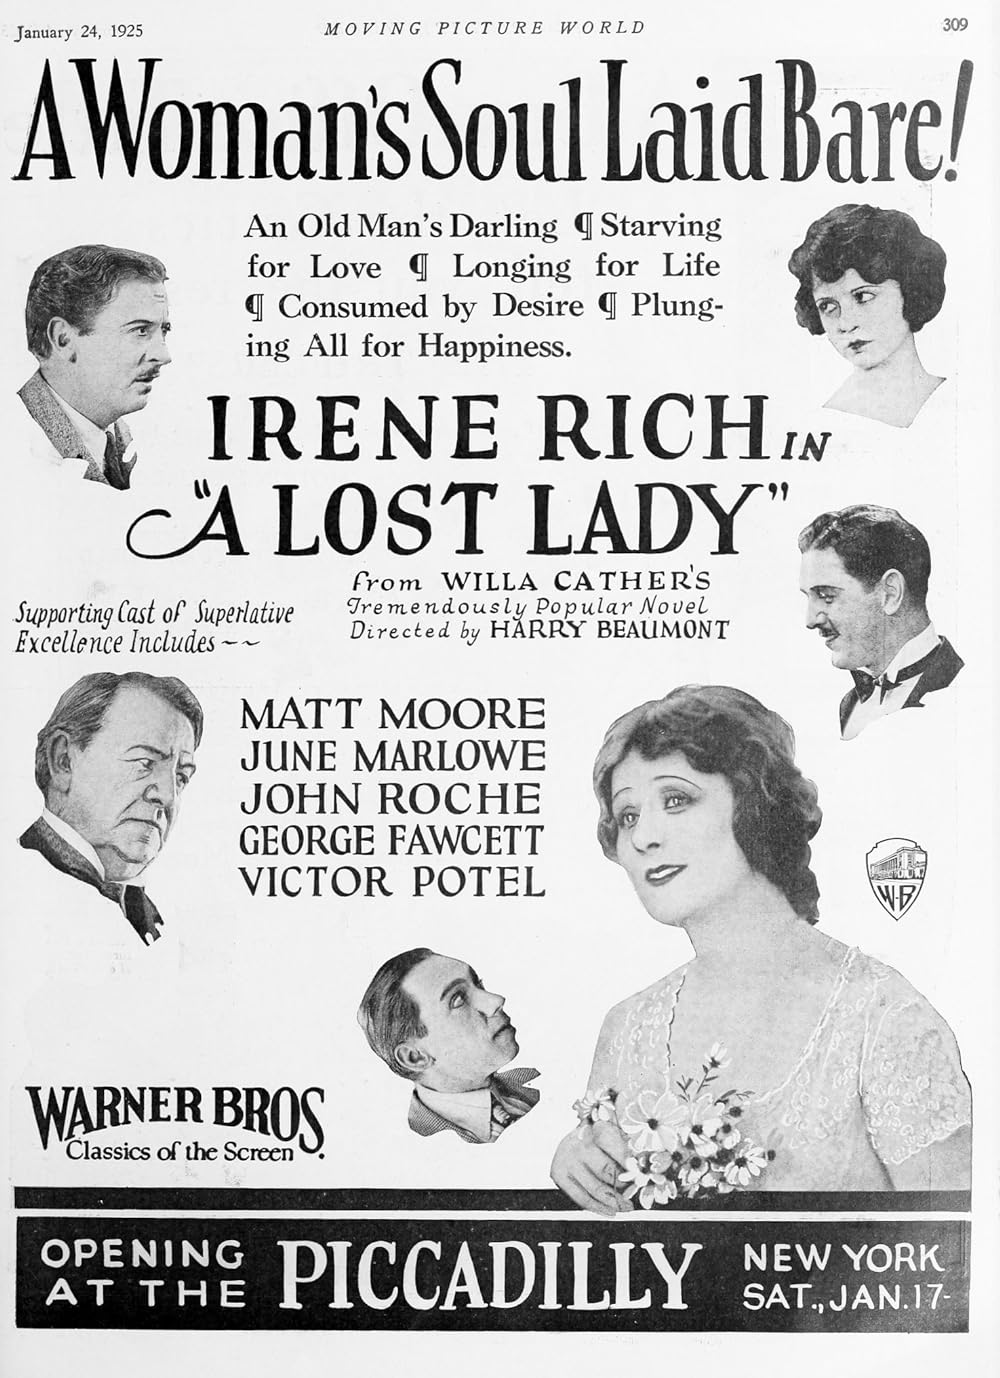 A Lost Lady (1924 film), Warner Bros. Entertainment Wiki